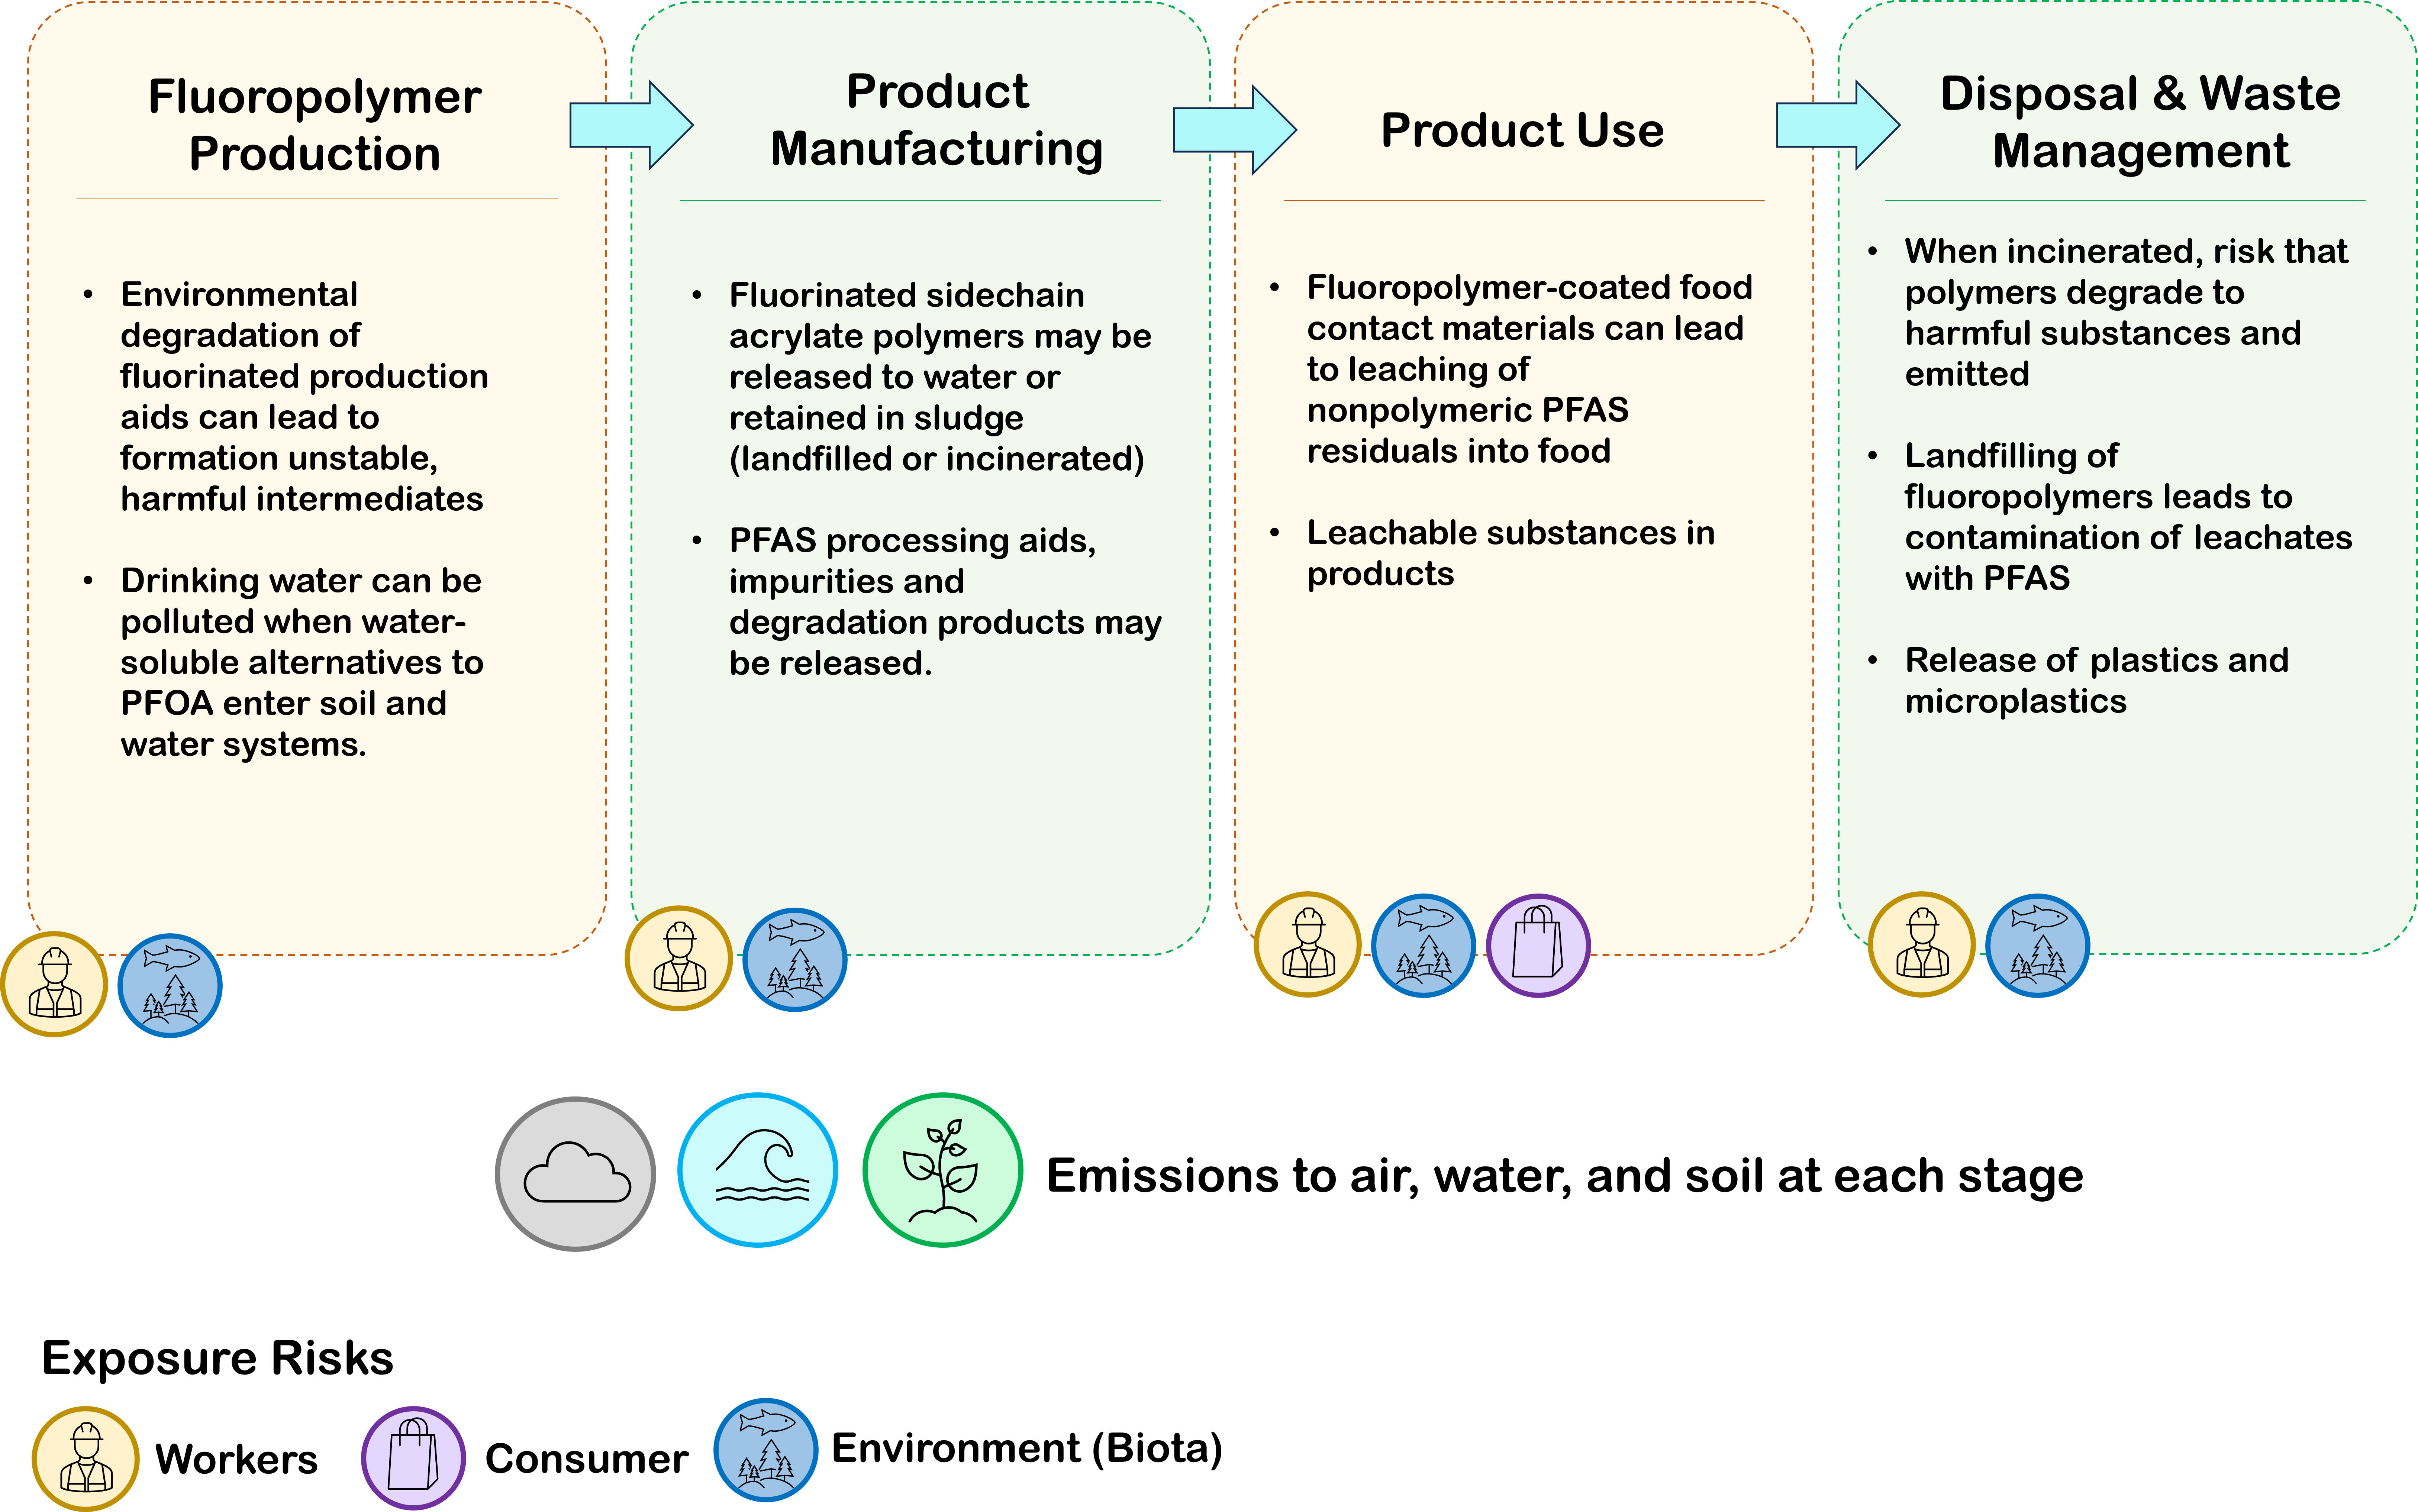 PFAS contamination and risks along the fluoropolymer value chain, including exposure risks and emissions (Adapted from: Cousins et al. (2020) and Eionet (2021)).  